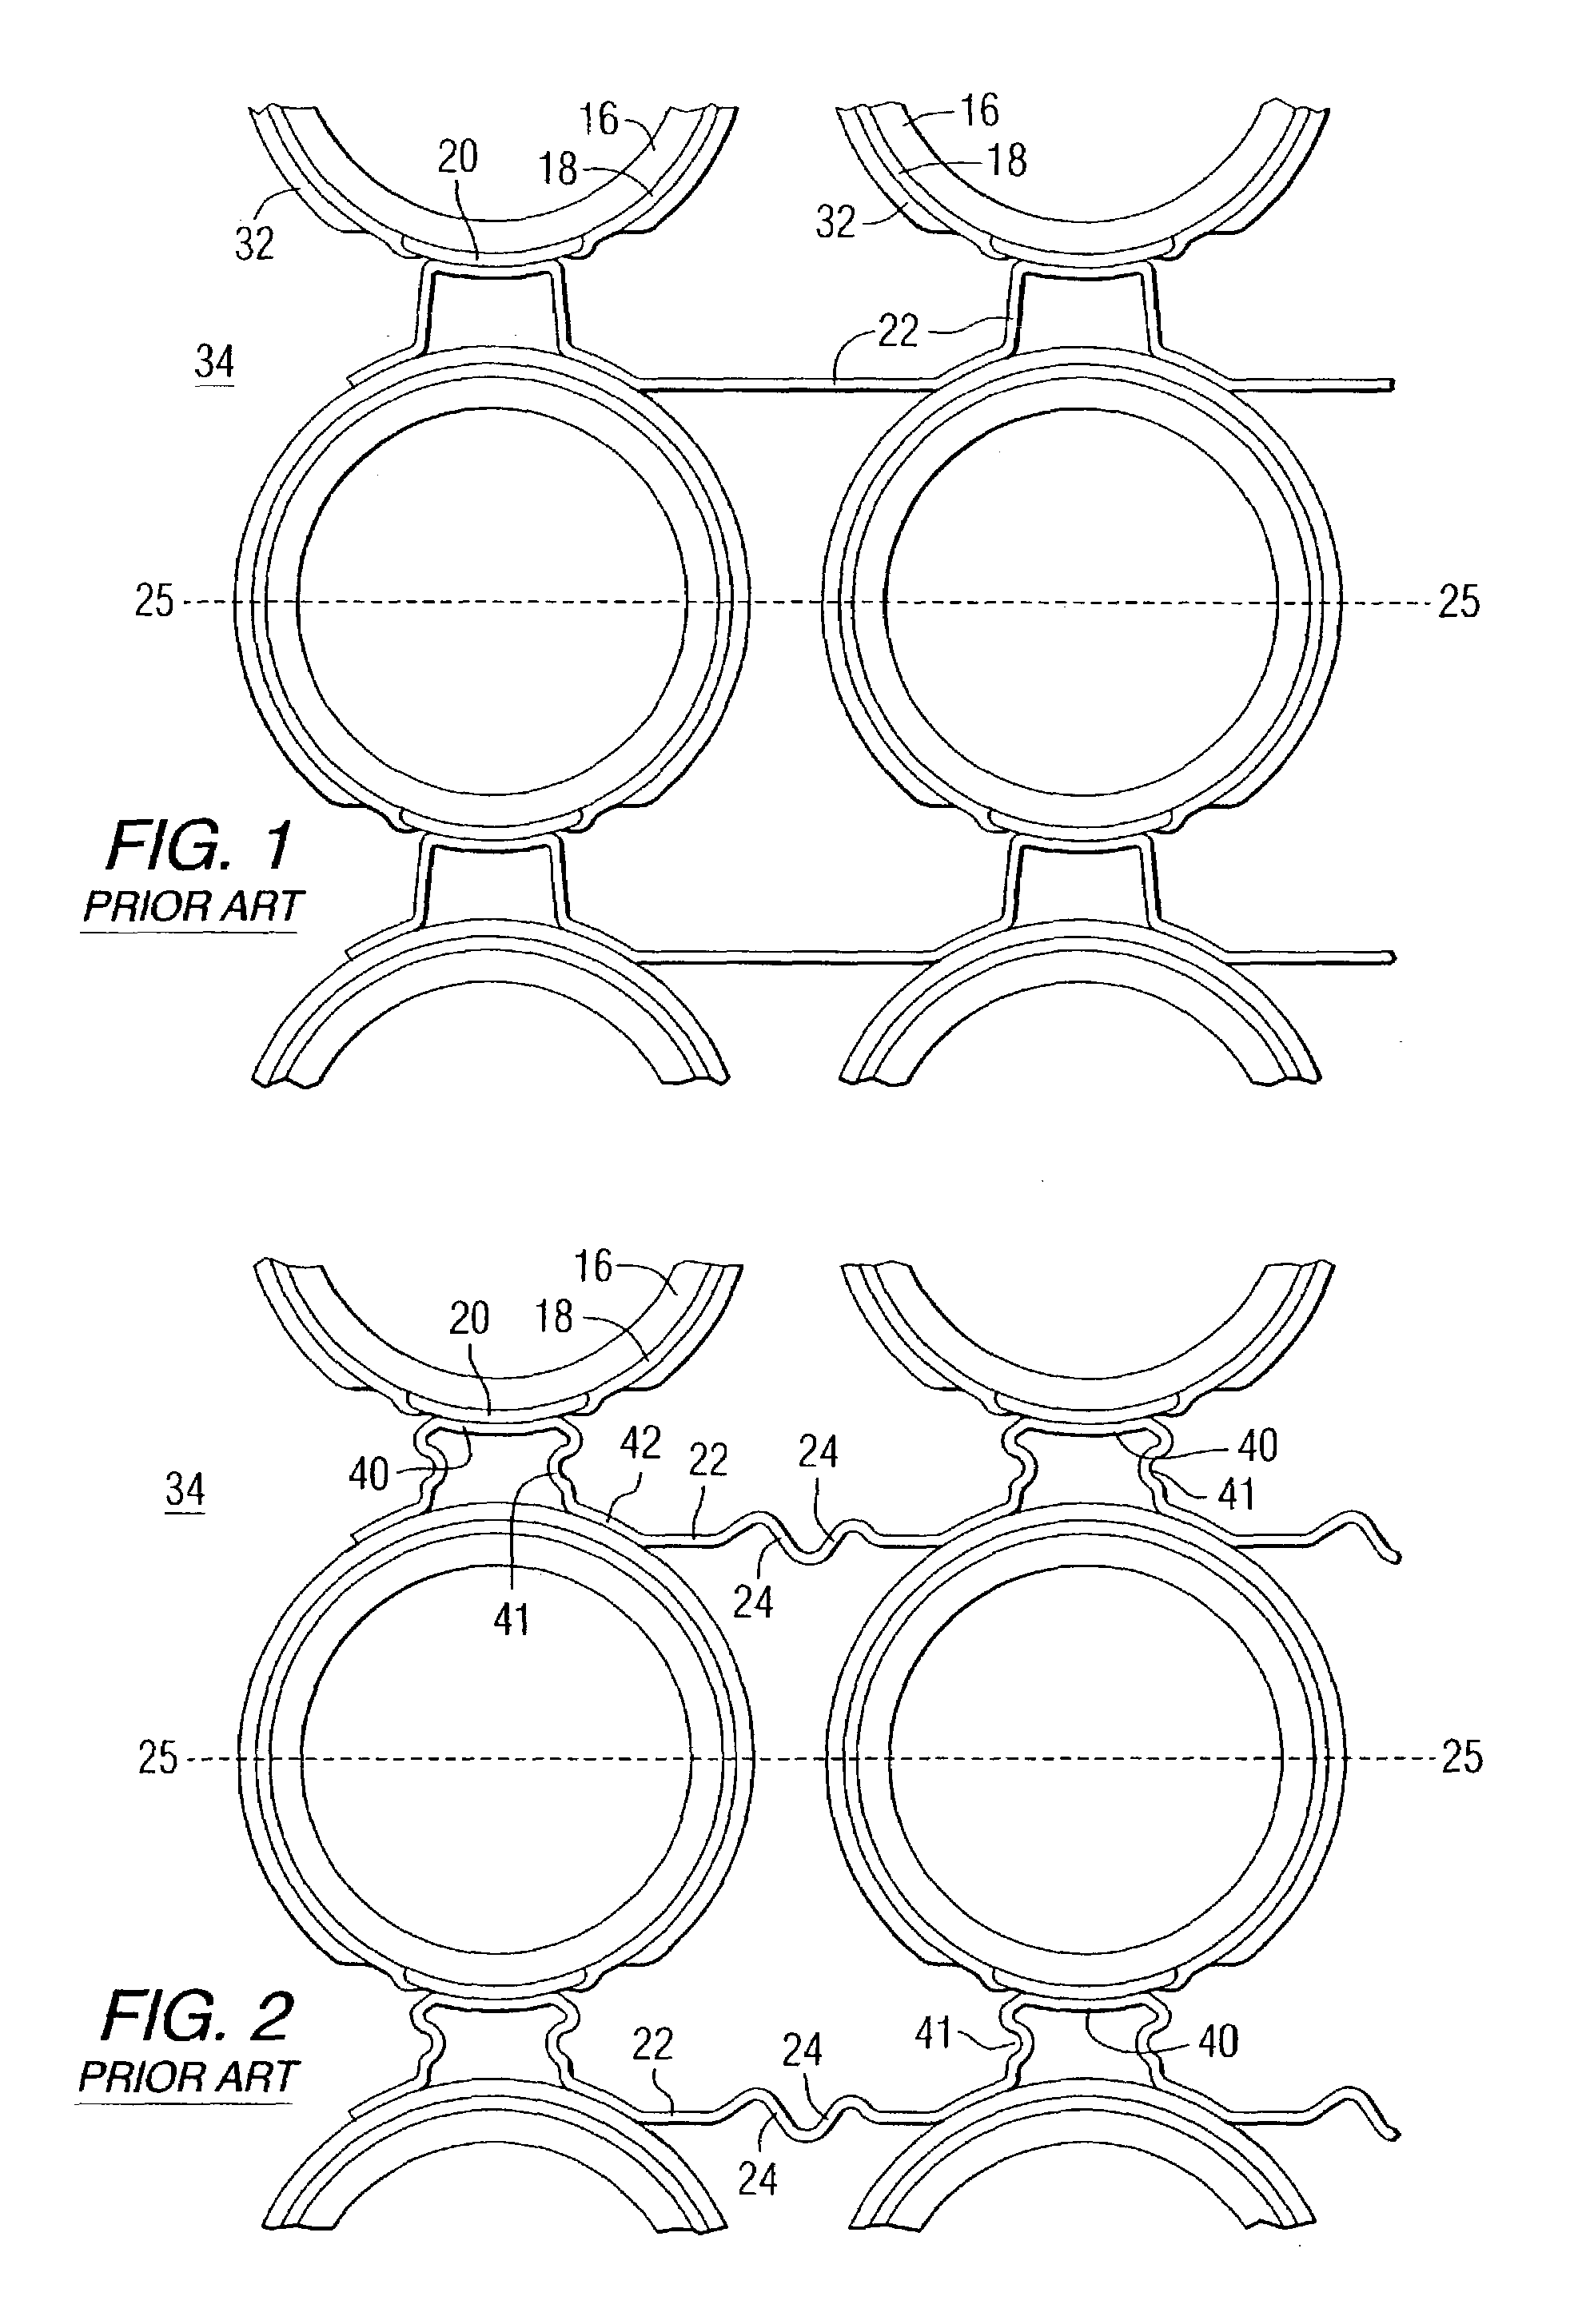 Combination nickel foam expanded nickel screen electrical connection supports for solid oxide fuel cells